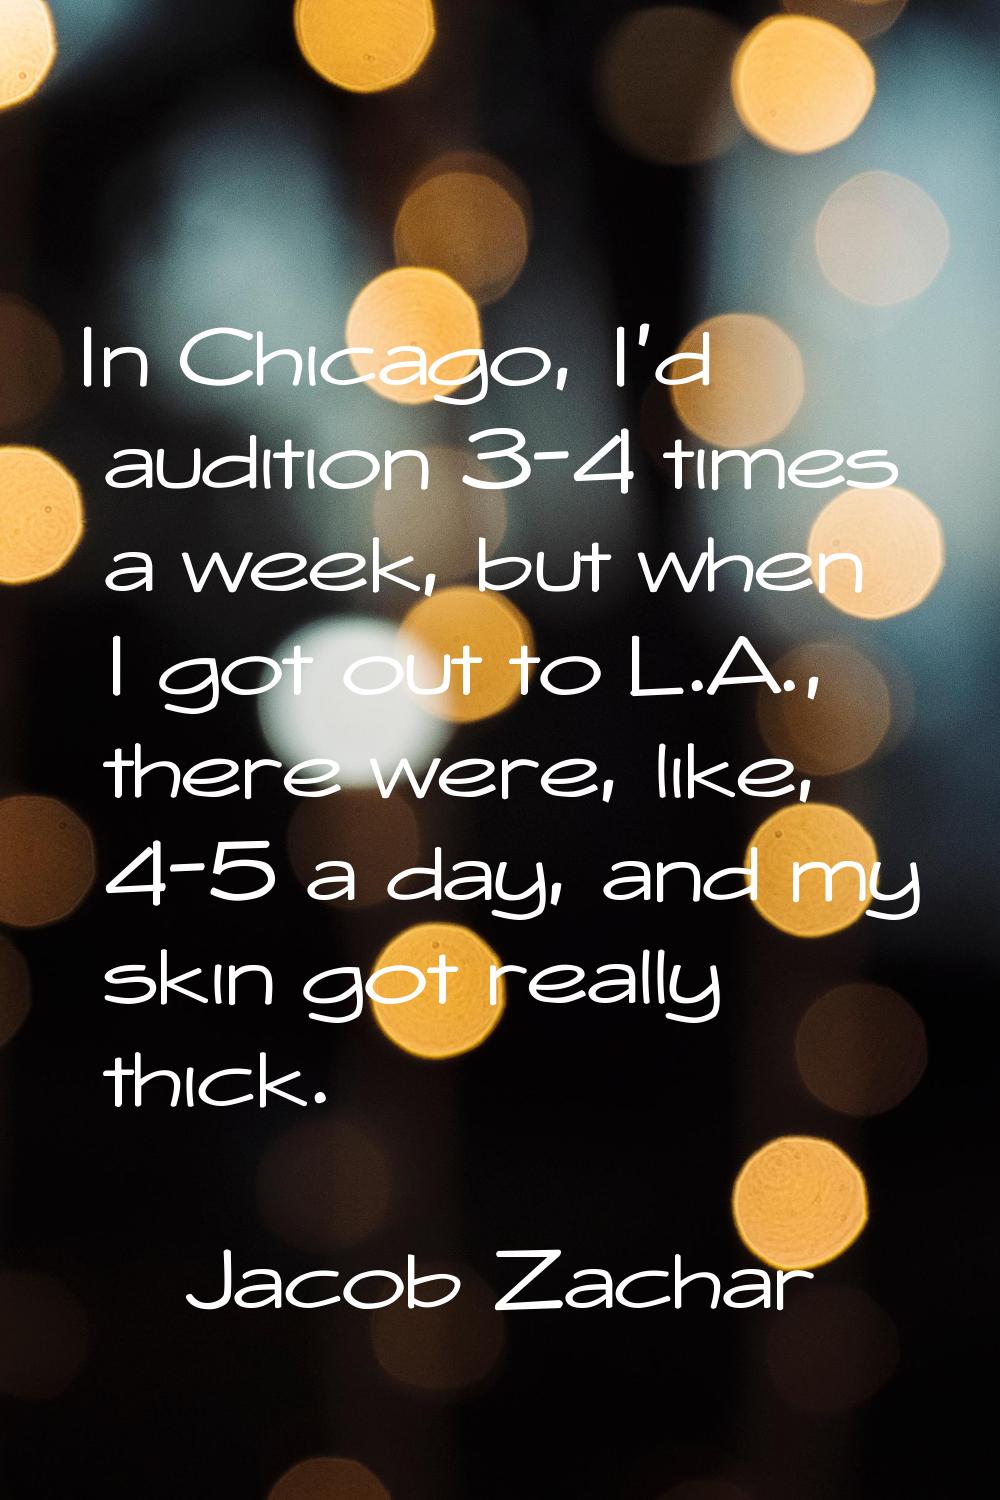 In Chicago, I'd audition 3-4 times a week, but when I got out to L.A., there were, like, 4-5 a day,